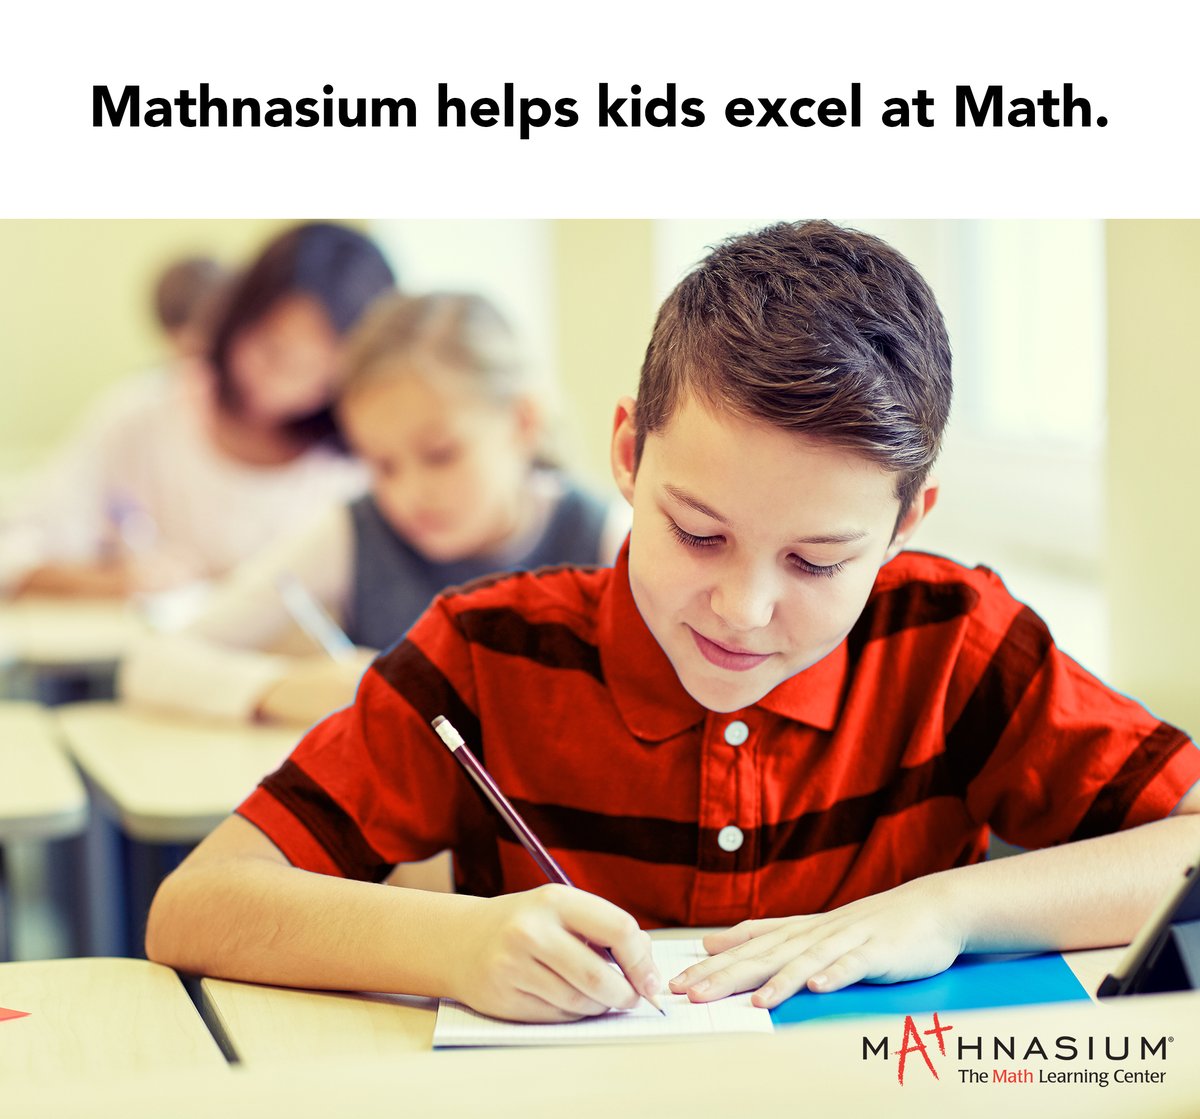 Mathnasium of Barrington helps kids learn to love math. ❤ 🙋 😁 Could your student use a helping hand? ✍ 😉 mathnasium.com/math-centers/b… #mathnasium #mathtutor #mathtest #mathgrade #mathhelp #mathclass